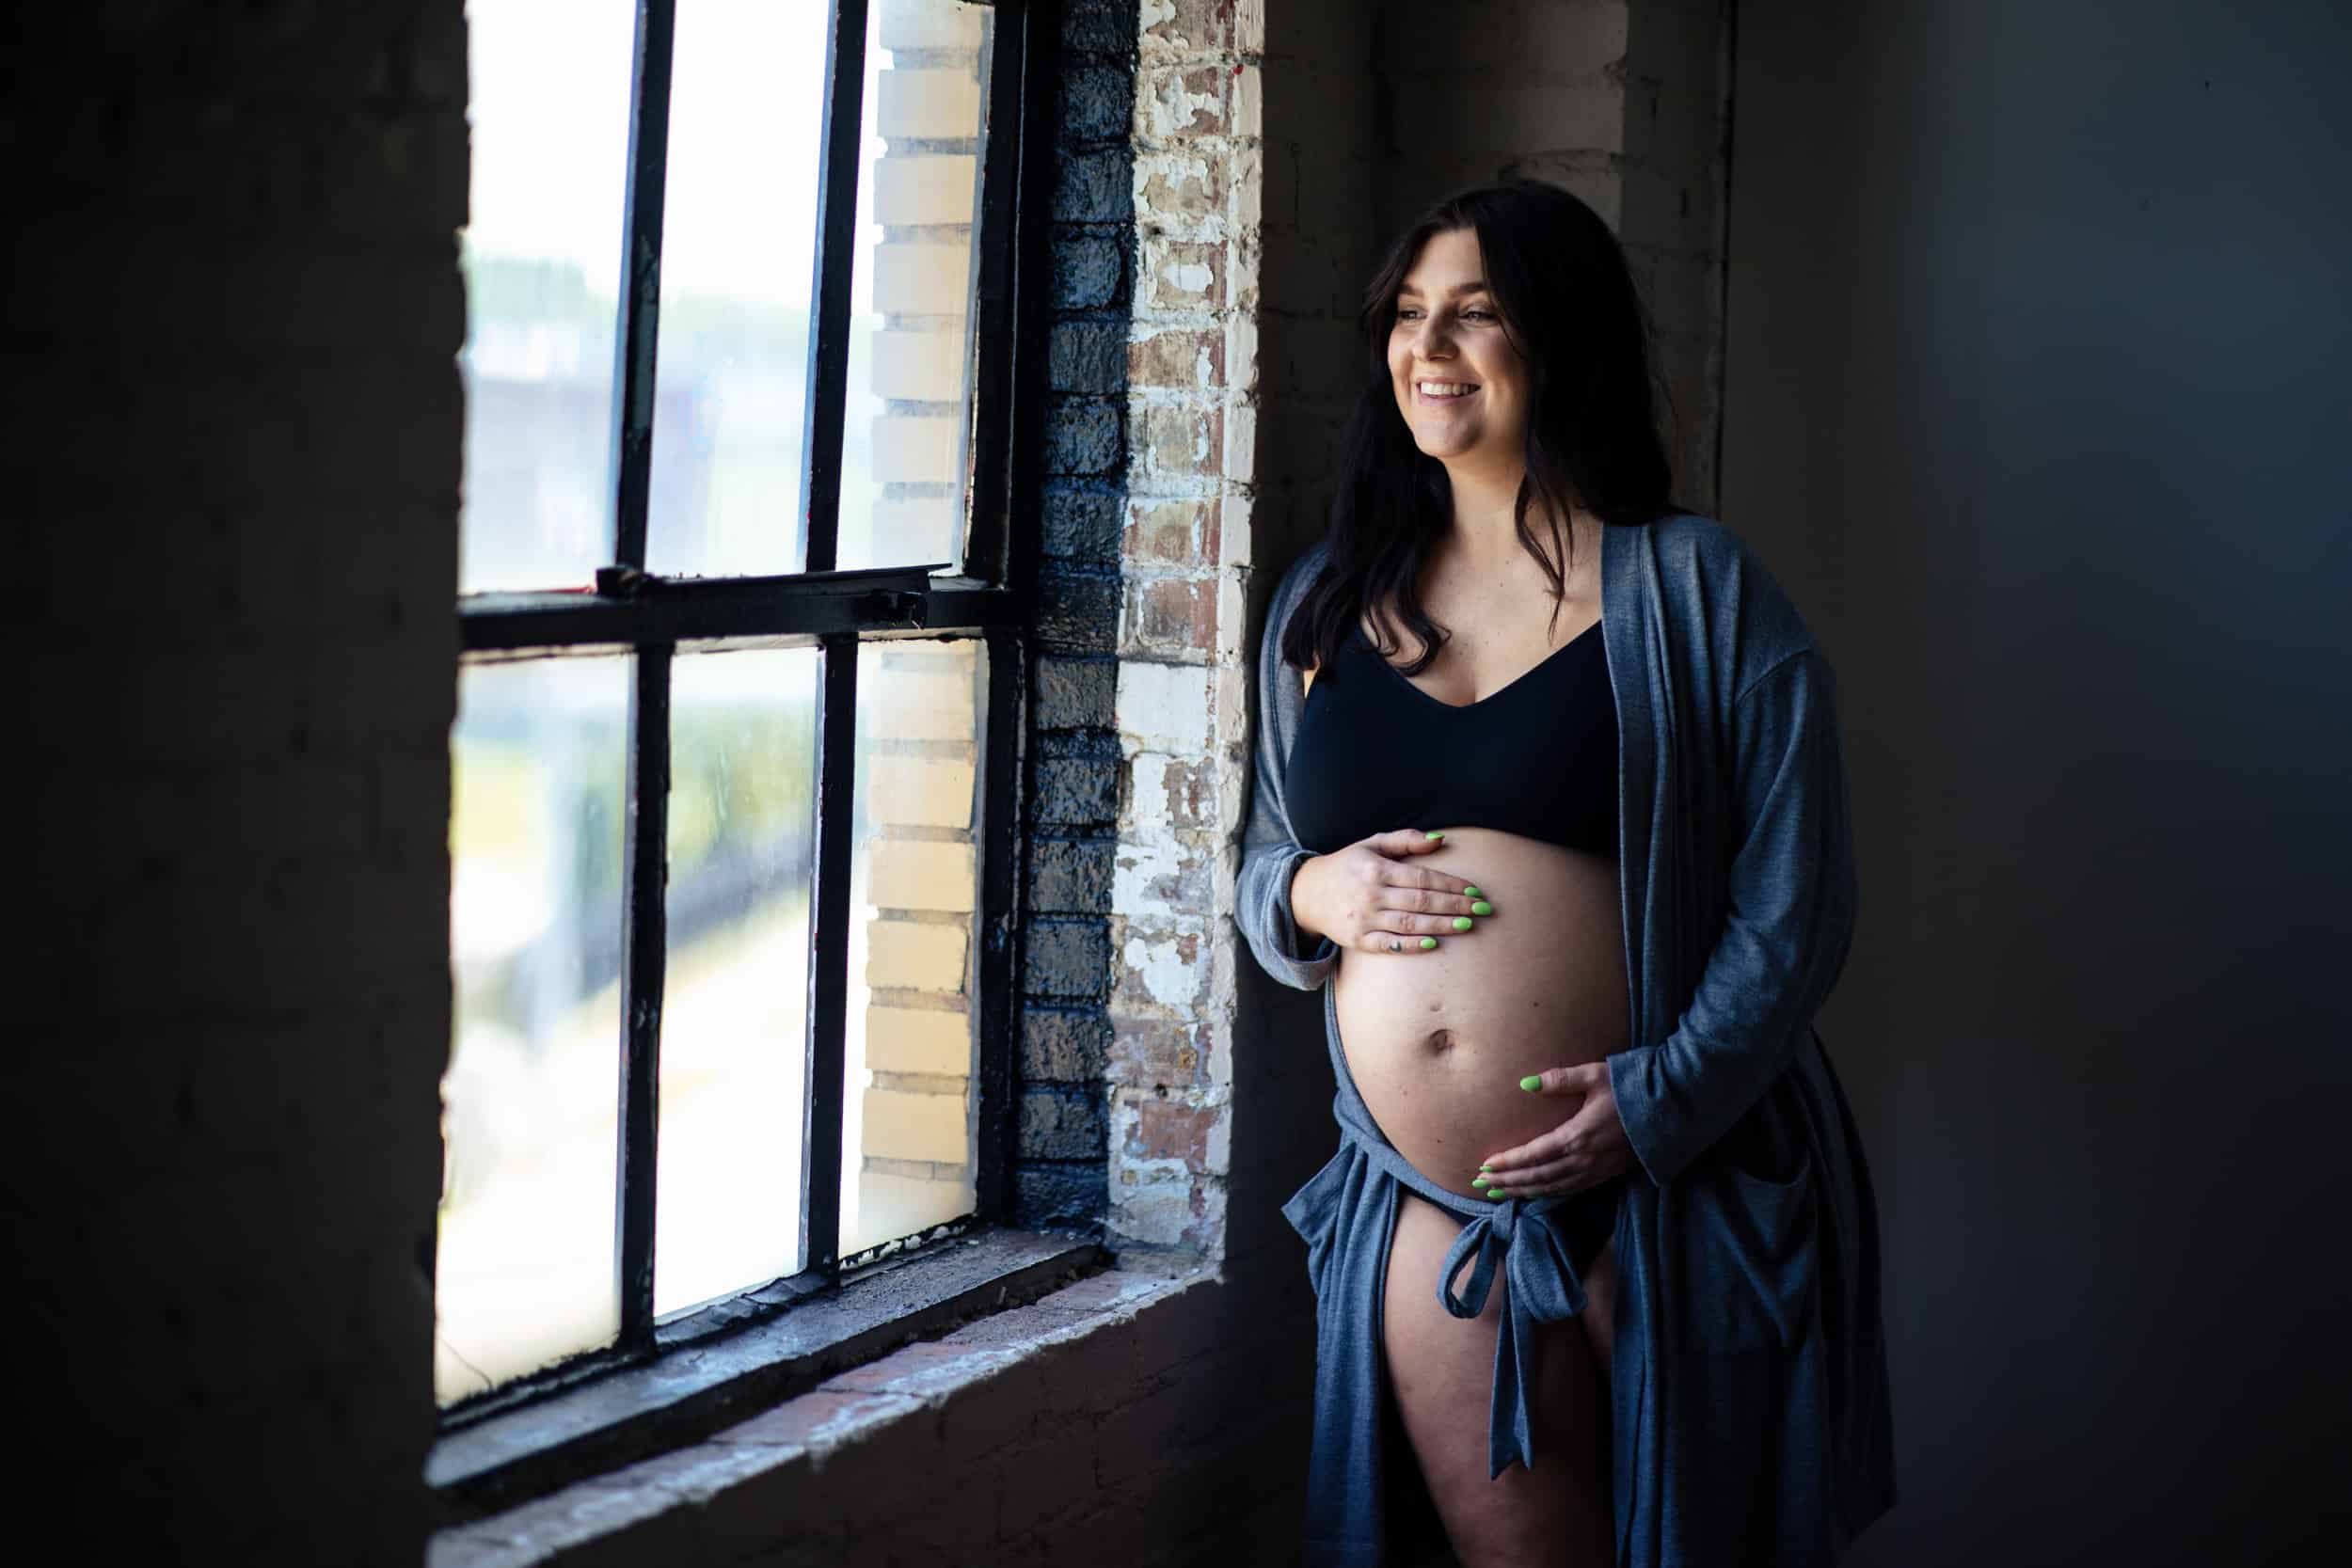 A pregnant woman leaning against a window.